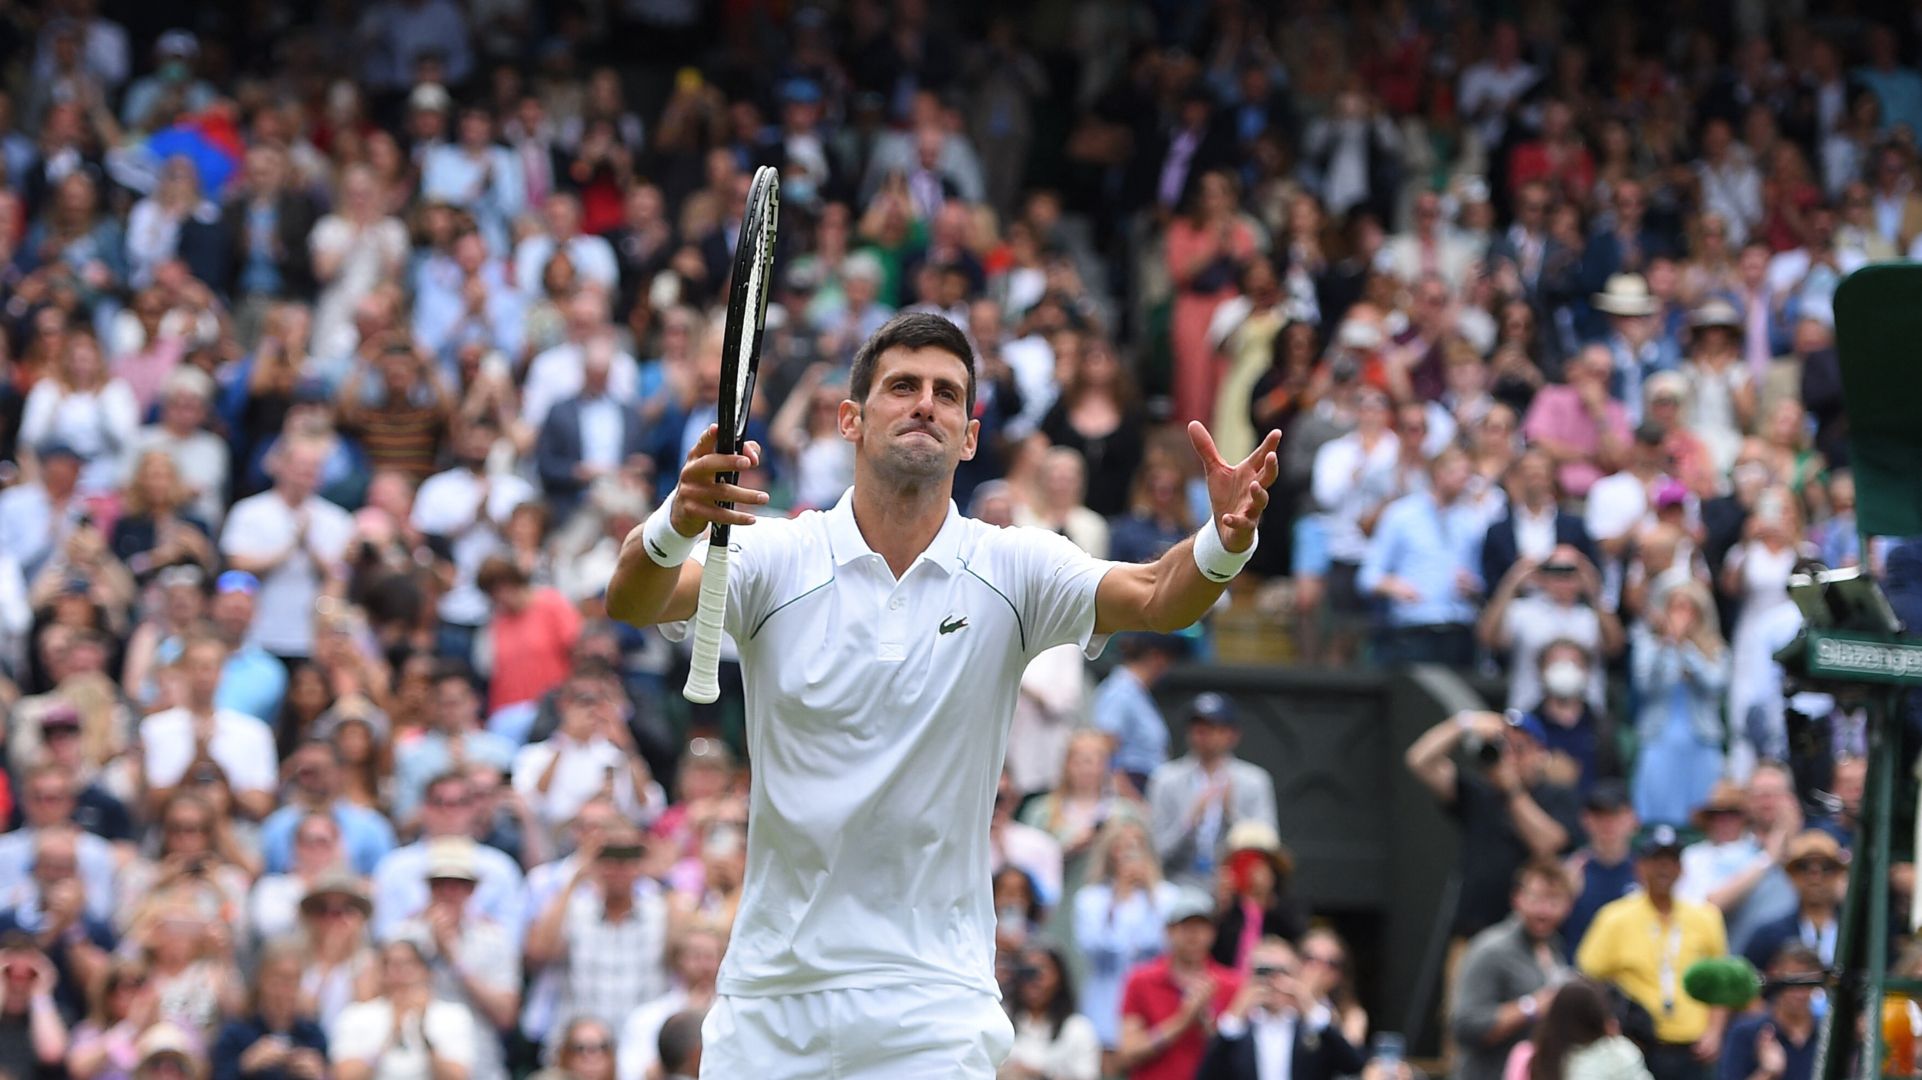 Wimbledon round-up, July 7, 2021 Your complete guide to the mens quarter-finals in SW19 LiveScore